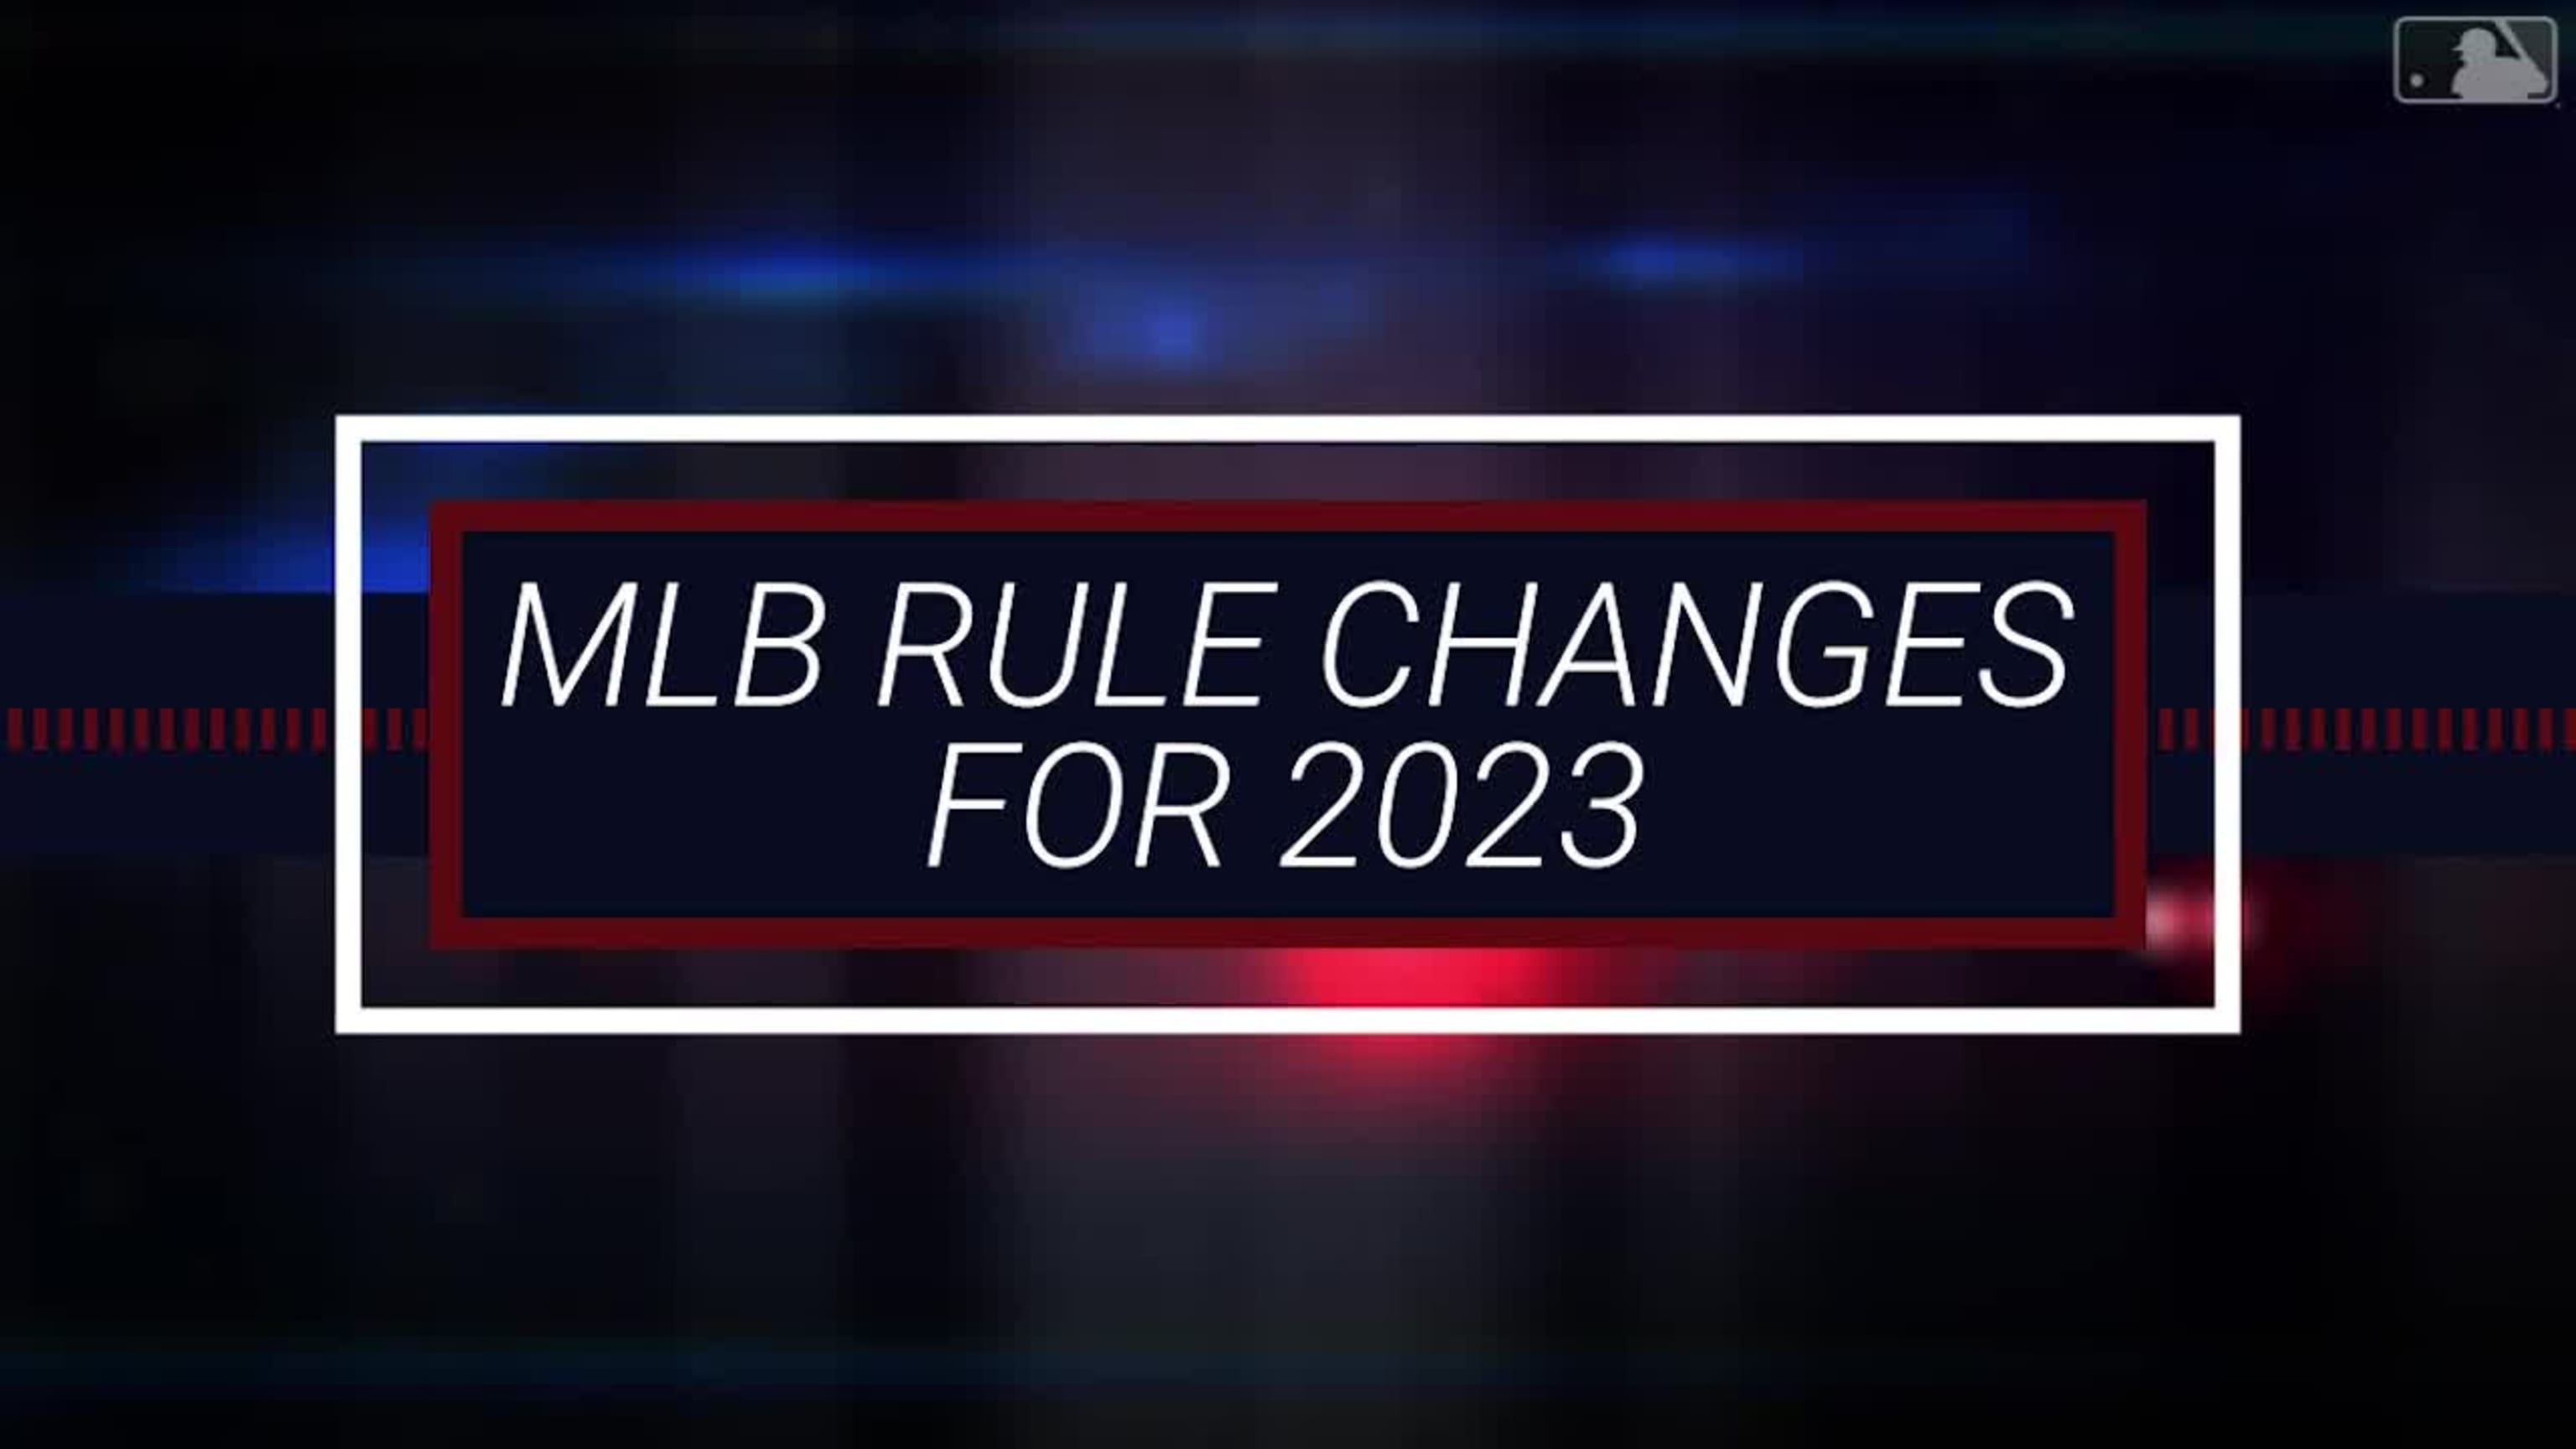 The 3 major rule changes major league baseball is making in 2023